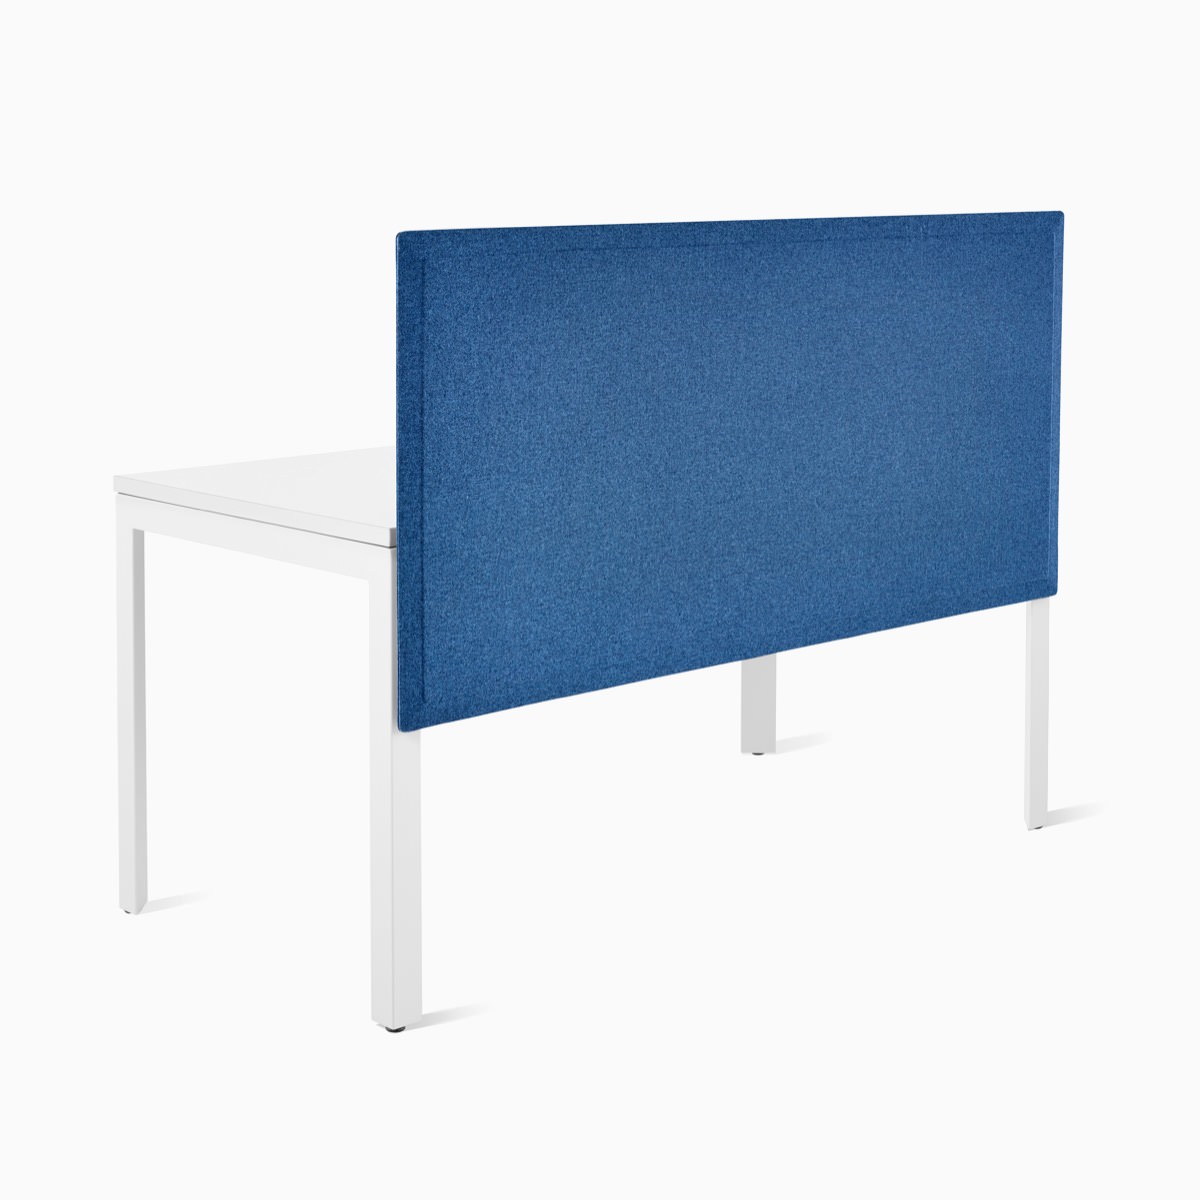 A blue fabric Pari privacy screen attached to a white Layout Studio table.